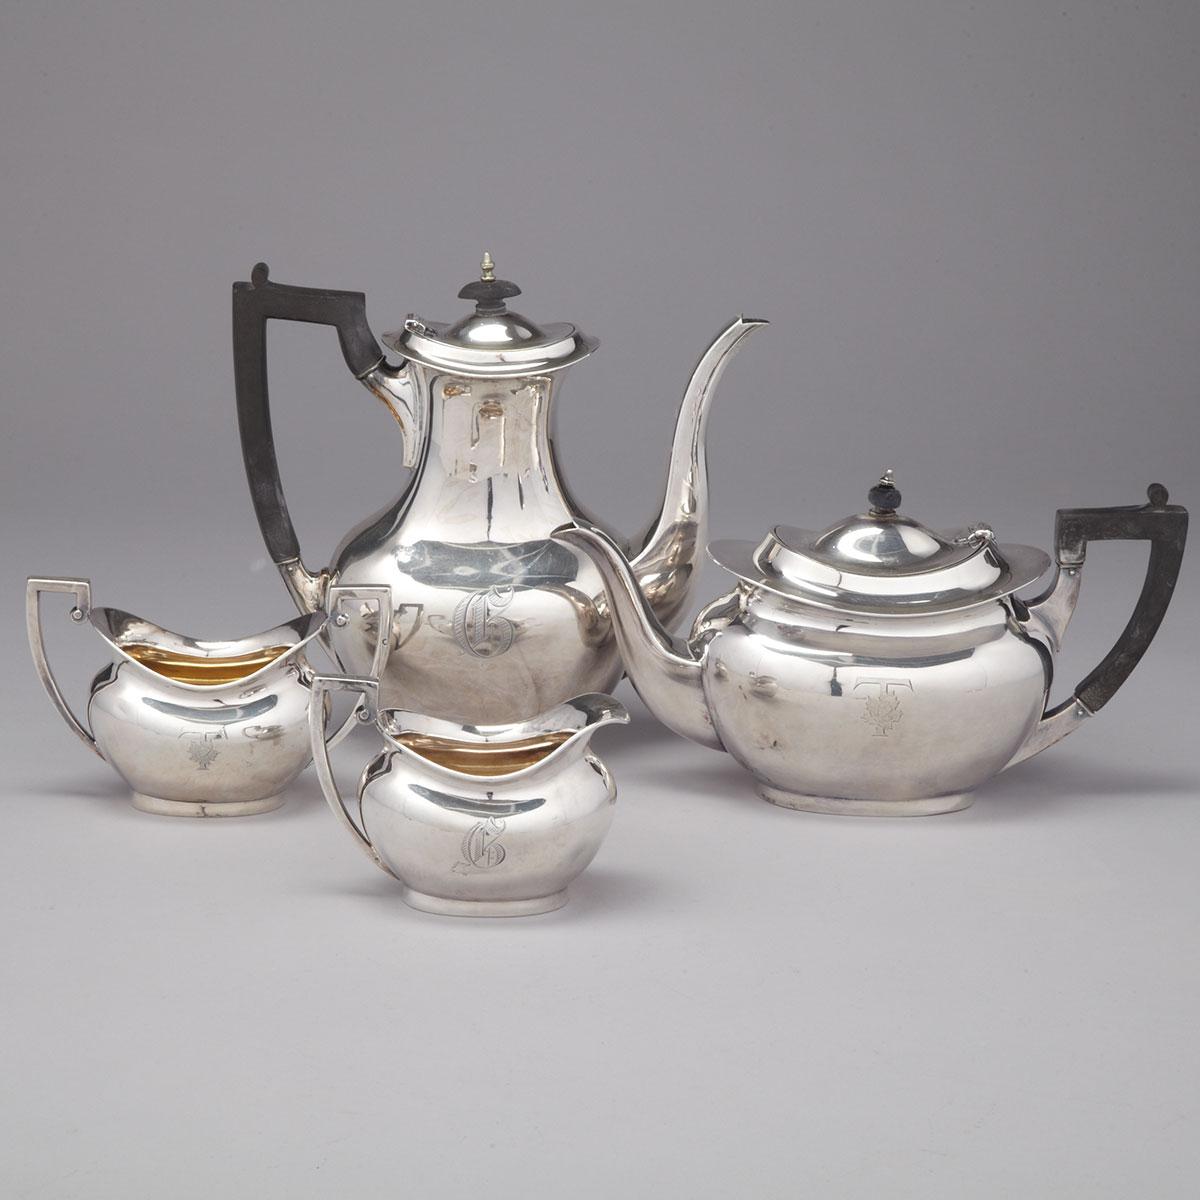 Canadian Silver Tea and Coffee Service, Roden Bros., Toronto, Ont., early 20th century